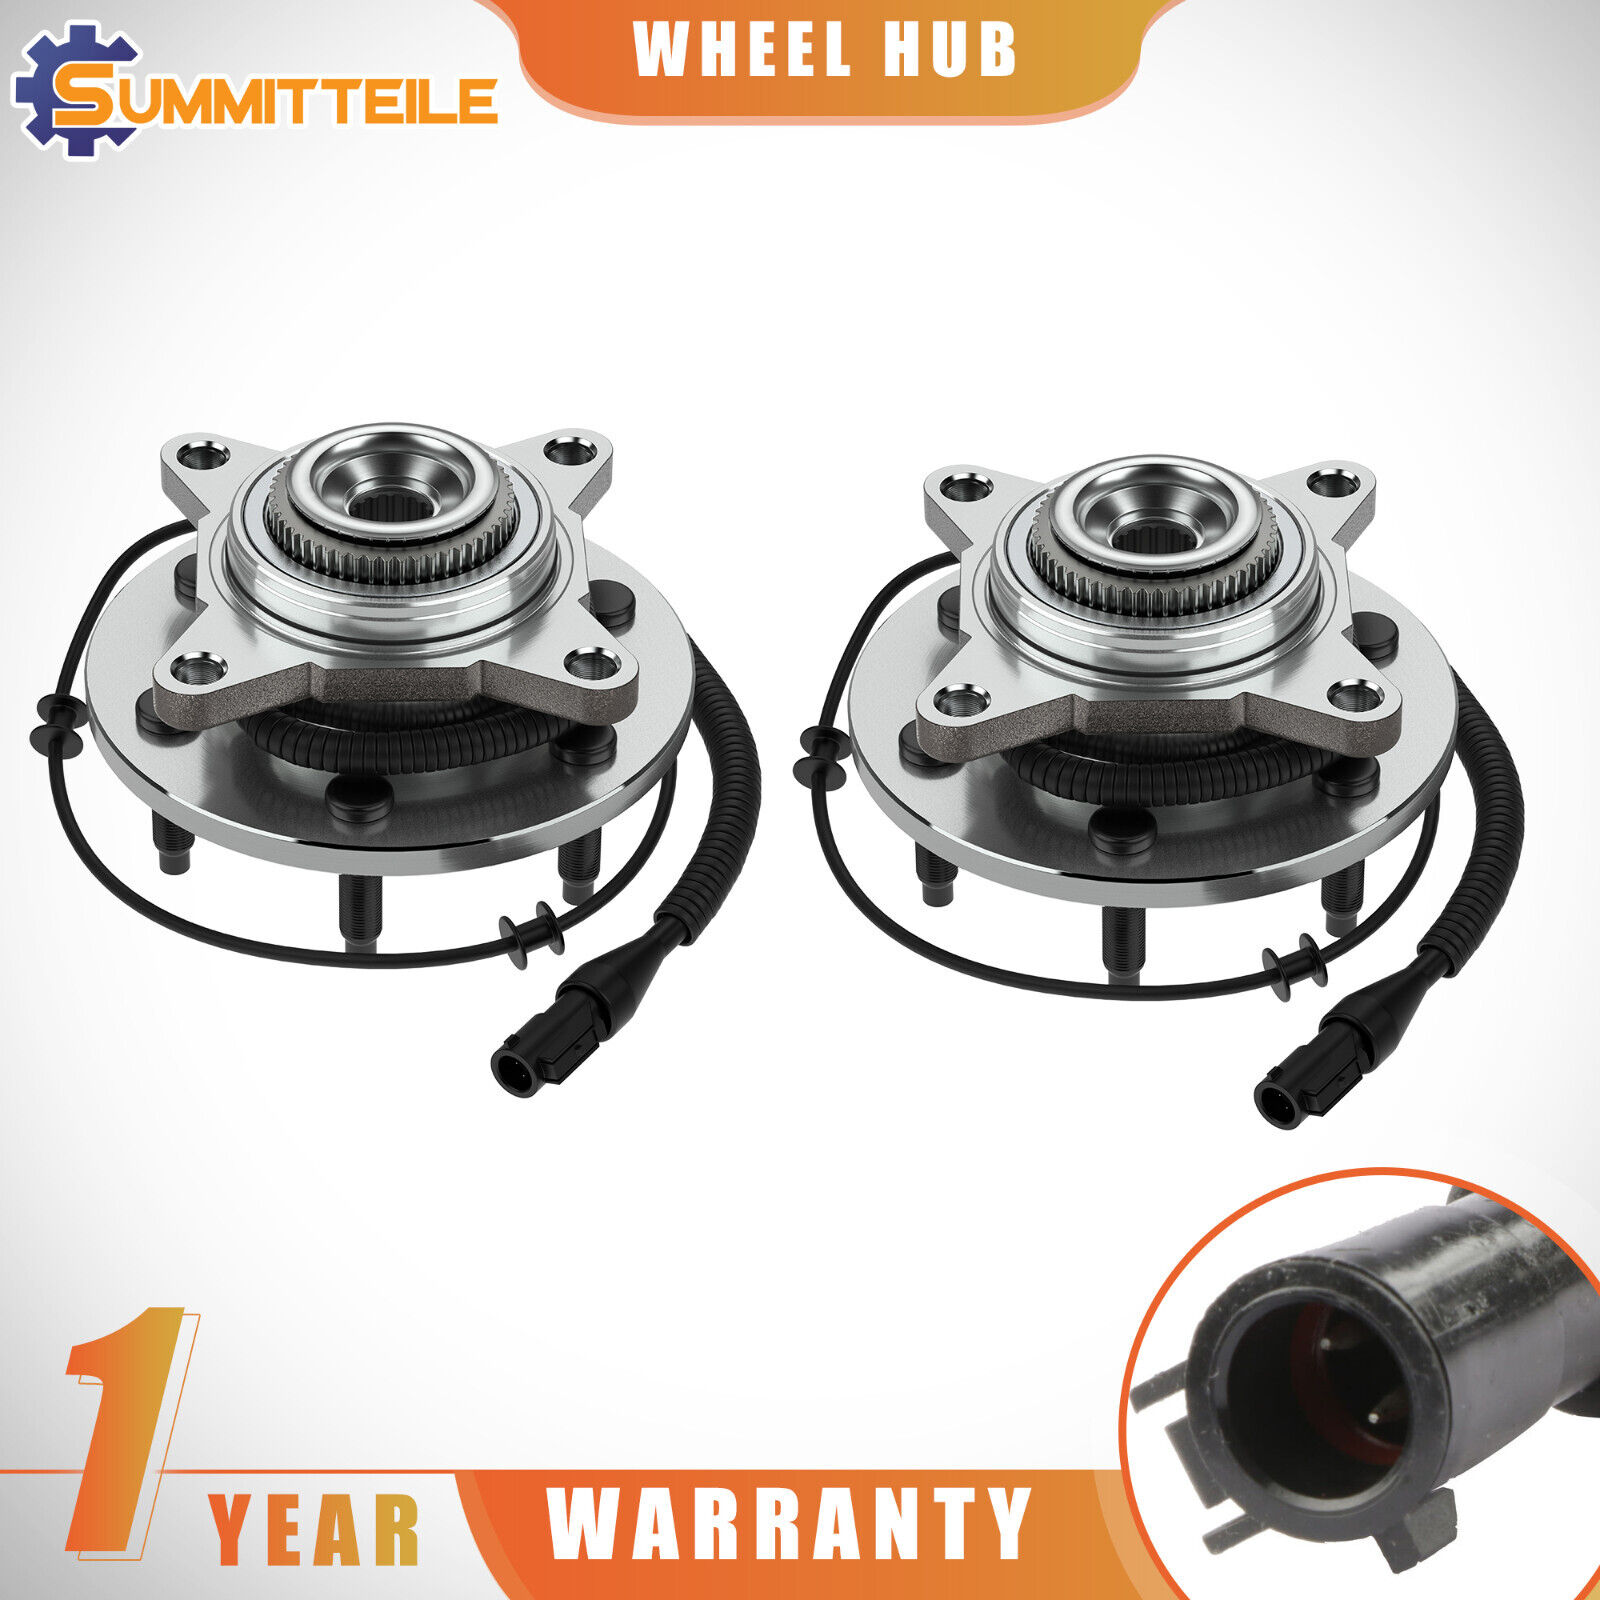 2PCS Front Wheel Hub Bearing ASSY w/ ABS For Ford F-150 Lincoln Mark LT 4WD